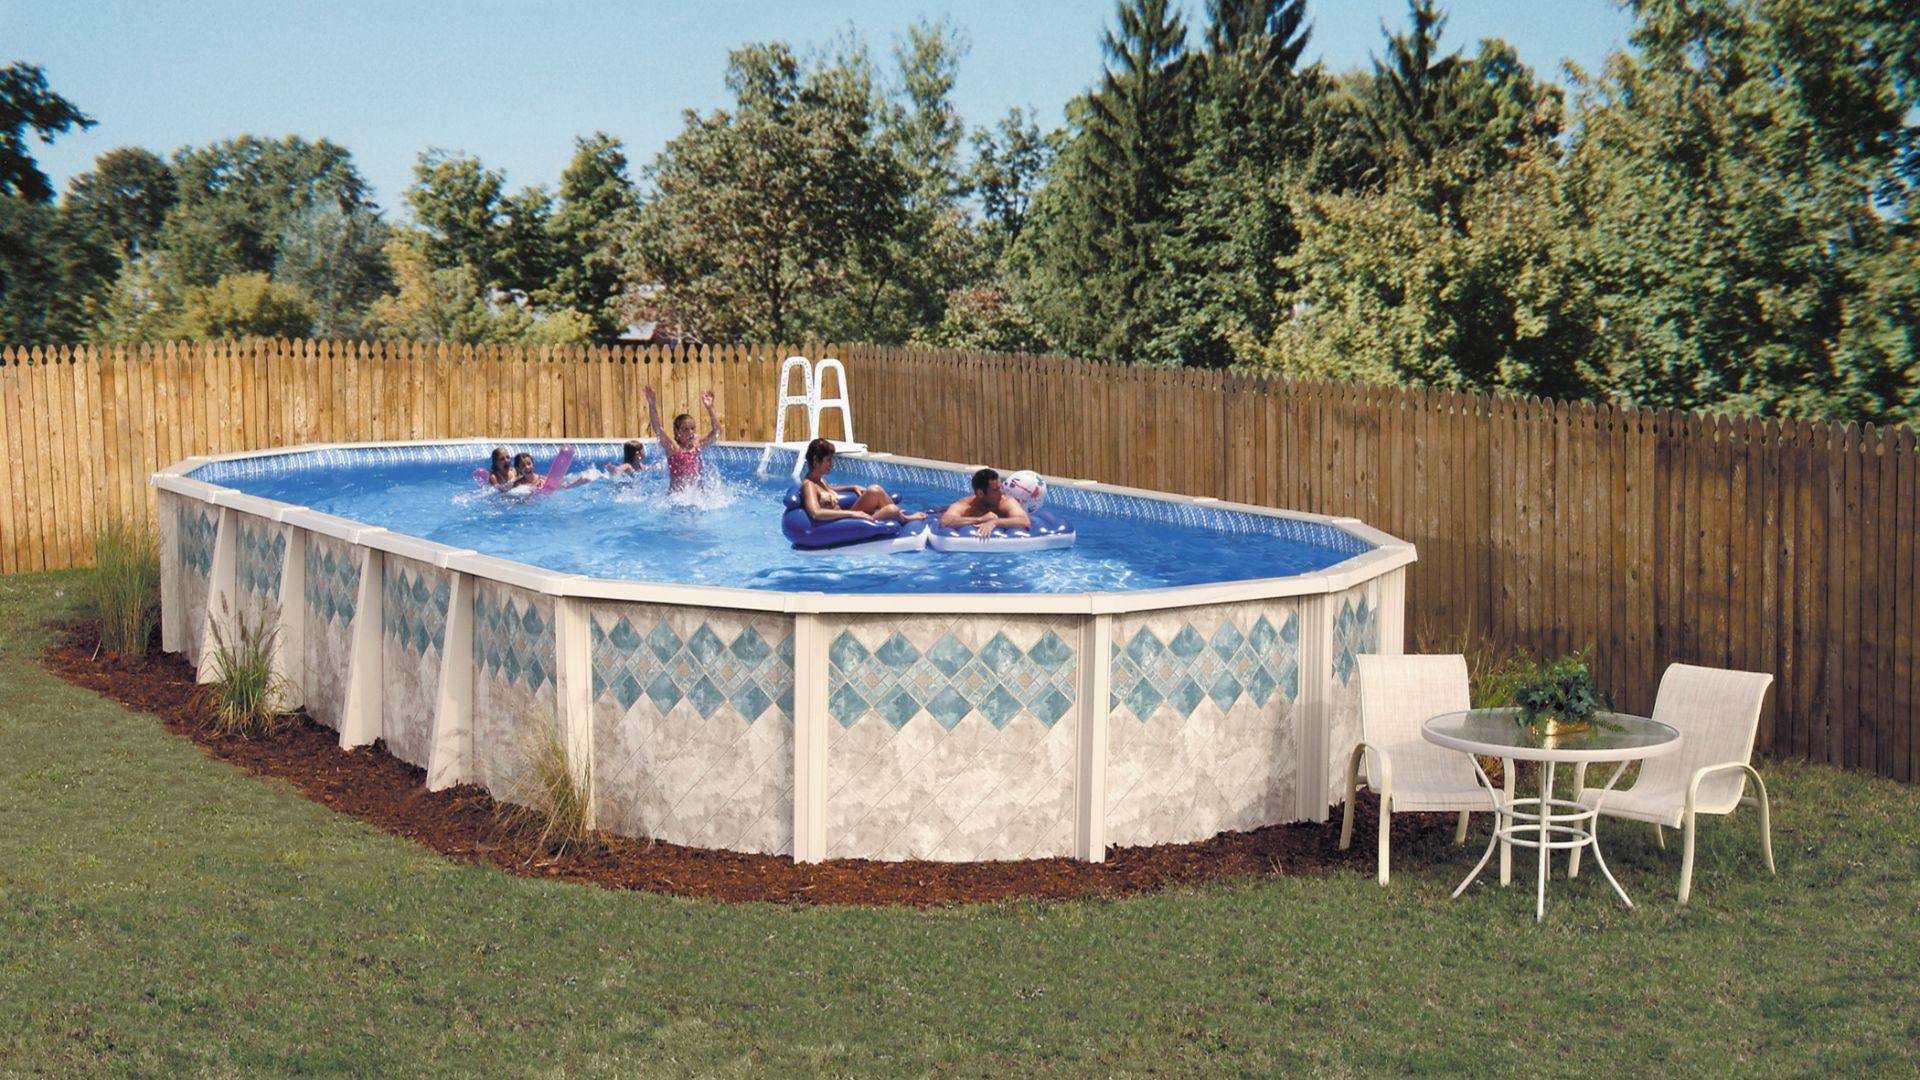 Doughboy oval above-ground swimming pool with family playing